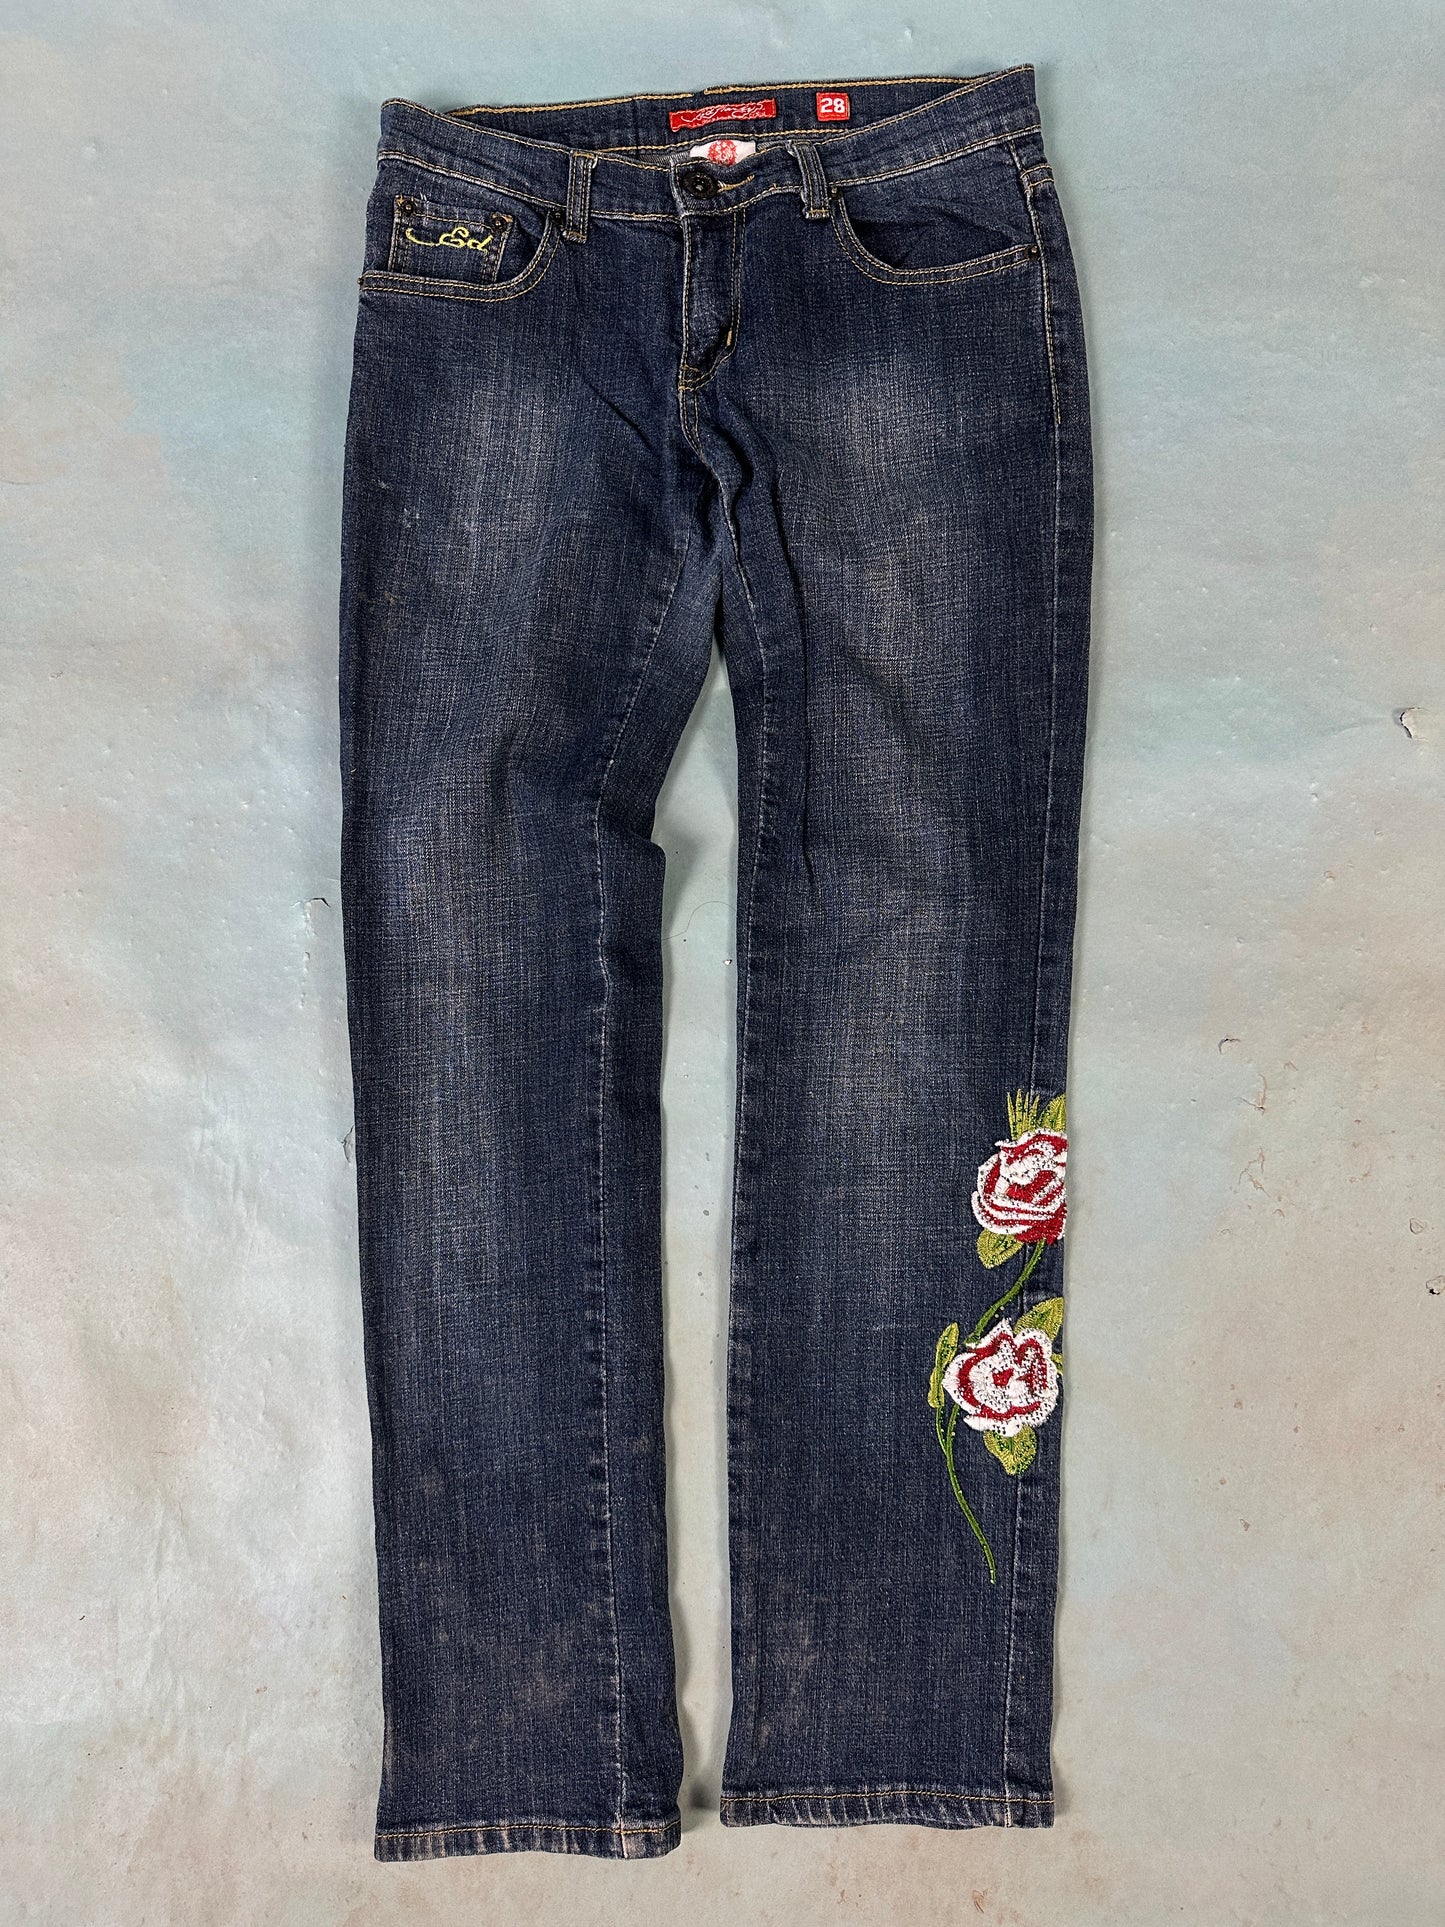 Ed Hardy Spell Out Skull Vintage Jeans - 28